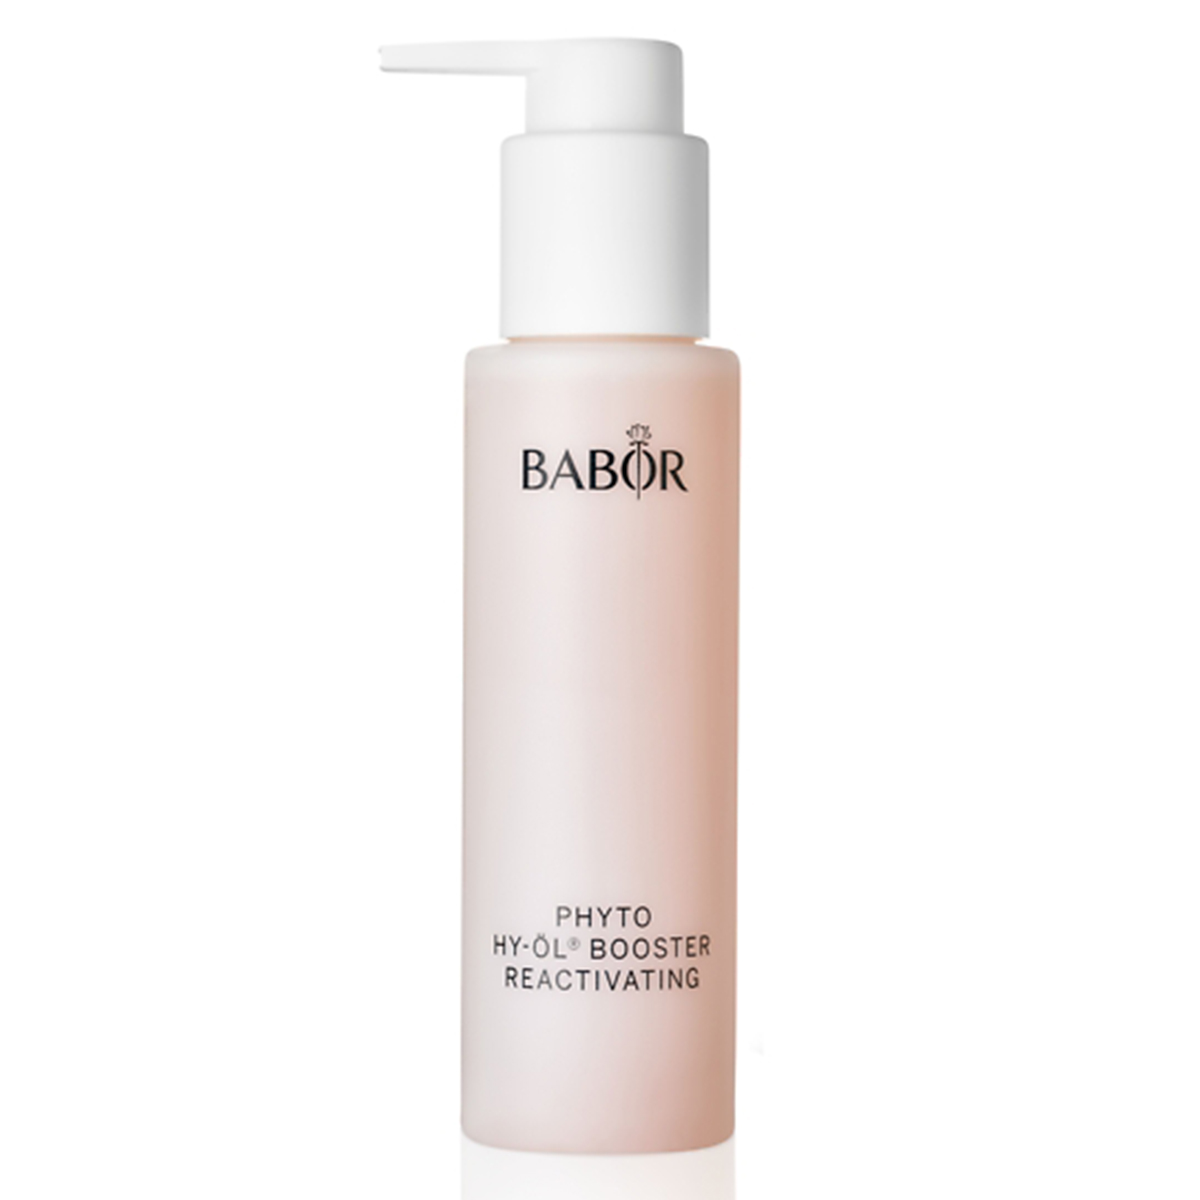 BABOR Phyto HY-ÖL Booster Reactivating, 100 ml